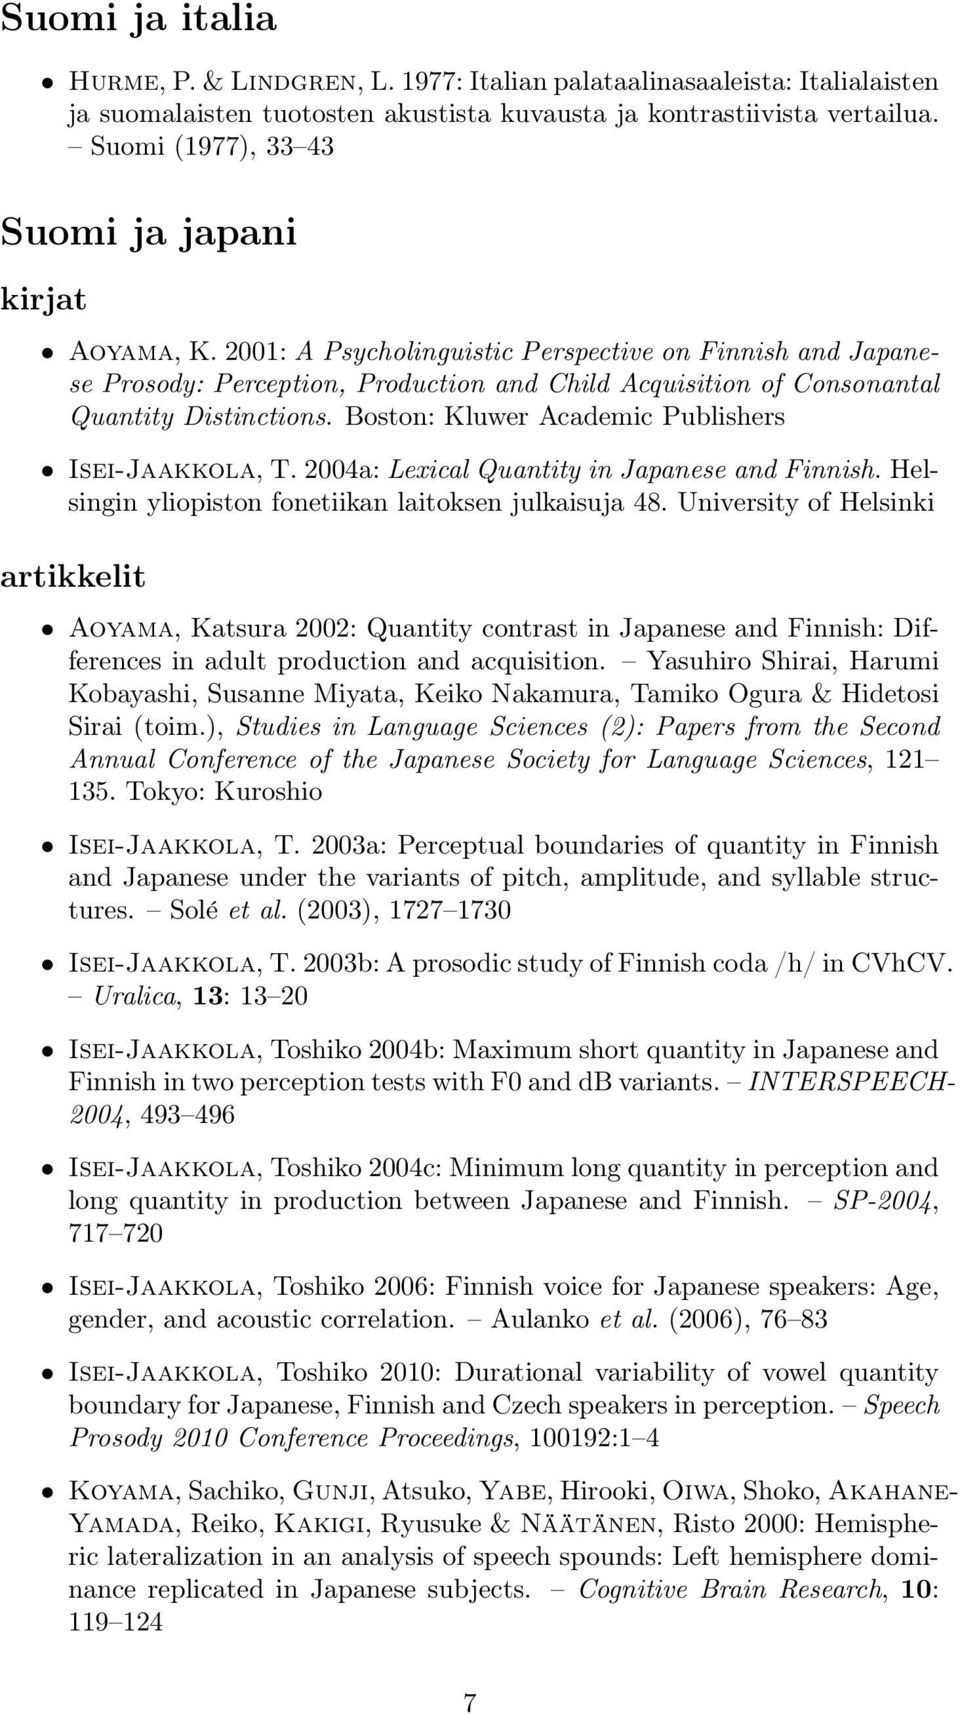 2001: A Psycholinguistic Perspective on Finnish and Japanese Prosody: Perception, Production and Child Acquisition of Consonantal Quantity Distinctions.